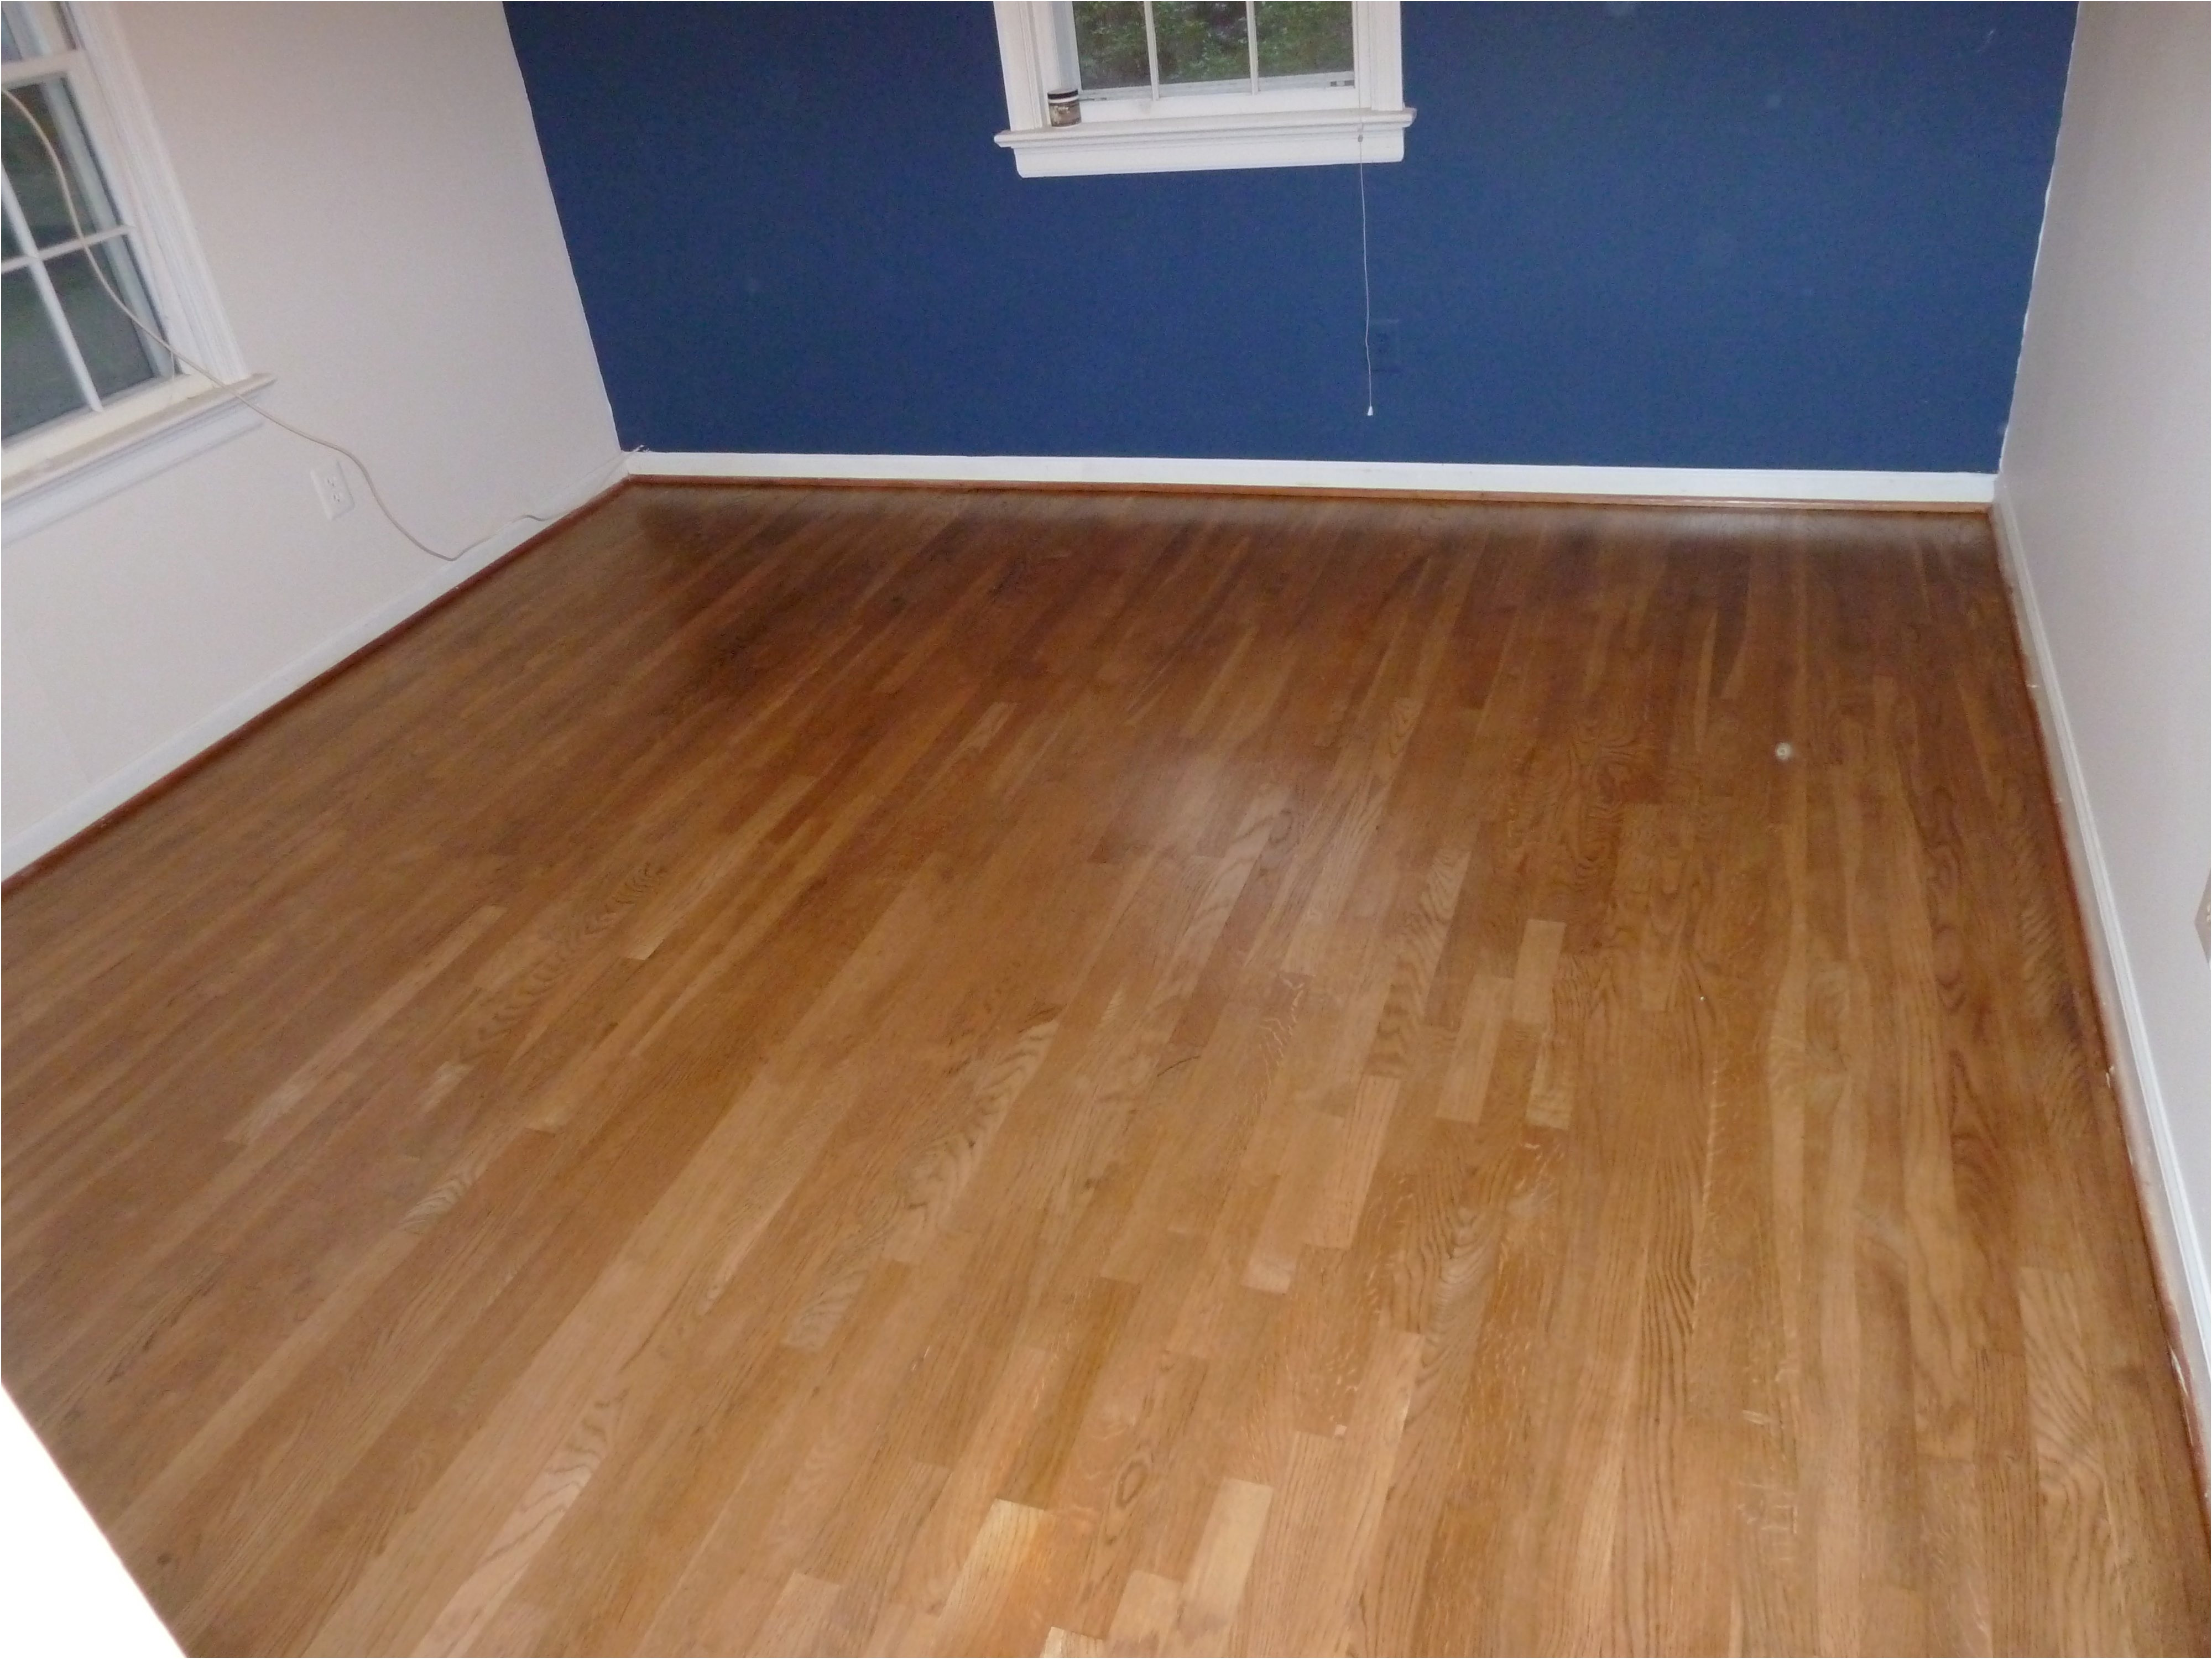 Bruce Hardwood Floor Cleaner and Wax Of Best Hand Scraped Hardwood Flooring Reviews Collection Engineered Pertaining to Best Hand Scraped Hardwood Flooring Reviews Images Hardwood Floor Cleaning How to Wax Hardwood Floors Hand